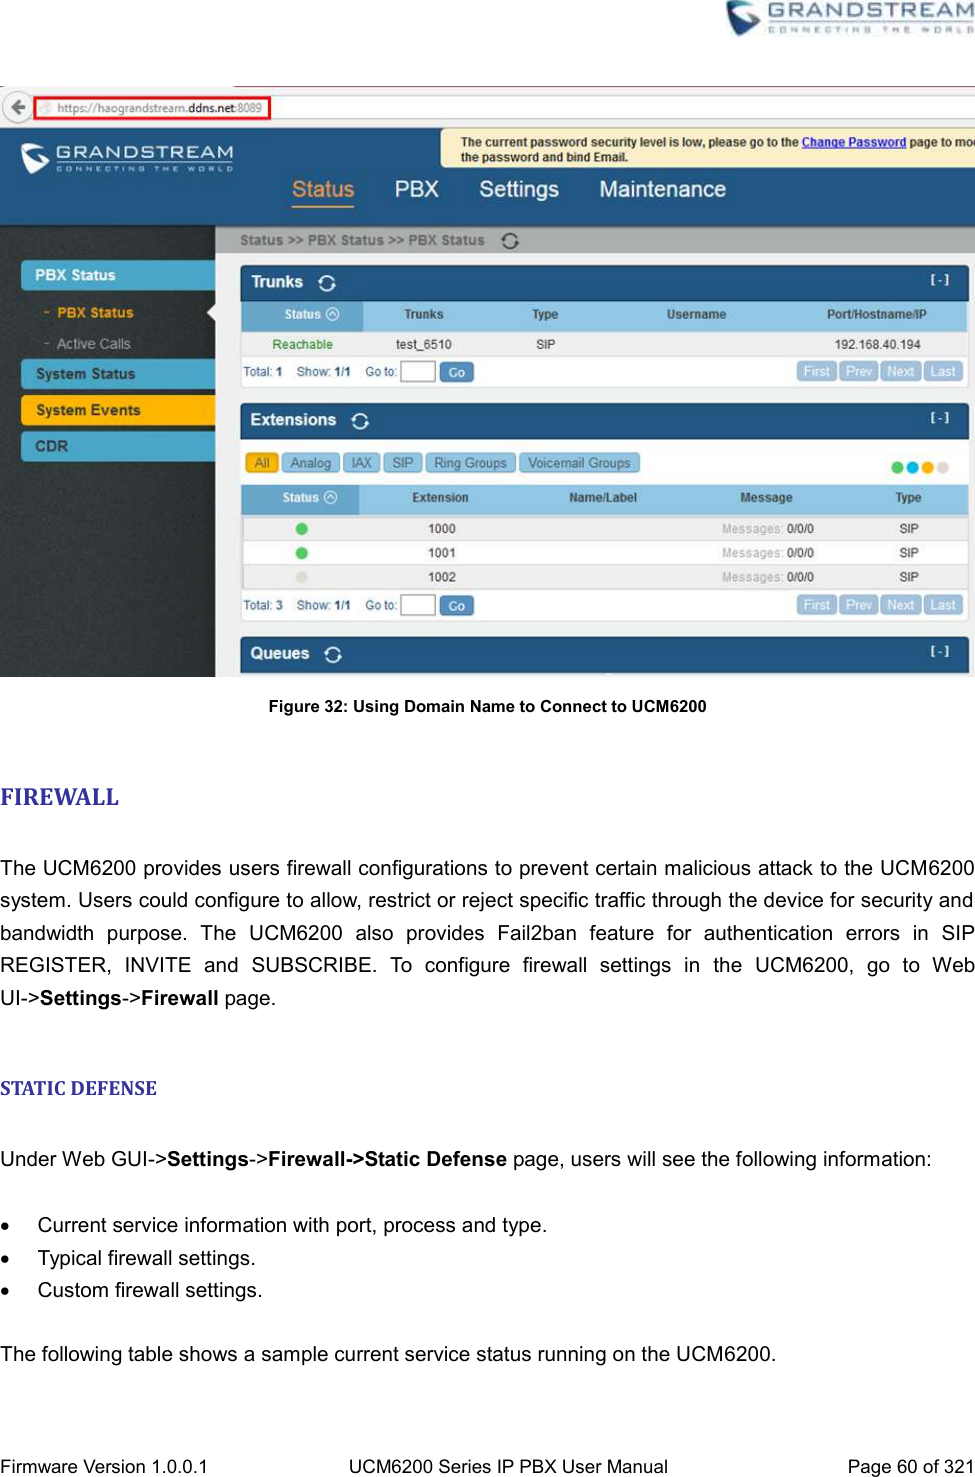  Firmware Version 1.0.0.1 UCM6200 Series IP PBX User Manual Page 60 of 321     Figure 32: Using Domain Name to Connect to UCM6200  FIREWALL  The UCM6200 provides users firewall configurations to prevent certain malicious attack to the UCM6200 system. Users could configure to allow, restrict or reject specific traffic through the device for security and bandwidth  purpose.  The  UCM6200  also  provides  Fail2ban  feature  for  authentication  errors  in  SIP REGISTER,  INVITE  and  SUBSCRIBE.  To  configure  firewall  settings  in  the  UCM6200,  go  to  Web UI-&gt;Settings-&gt;Firewall page.  STATIC DEFENSE  Under Web GUI-&gt;Settings-&gt;Firewall-&gt;Static Defense page, users will see the following information:    Current service information with port, process and type.   Typical firewall settings.   Custom firewall settings.  The following table shows a sample current service status running on the UCM6200.  